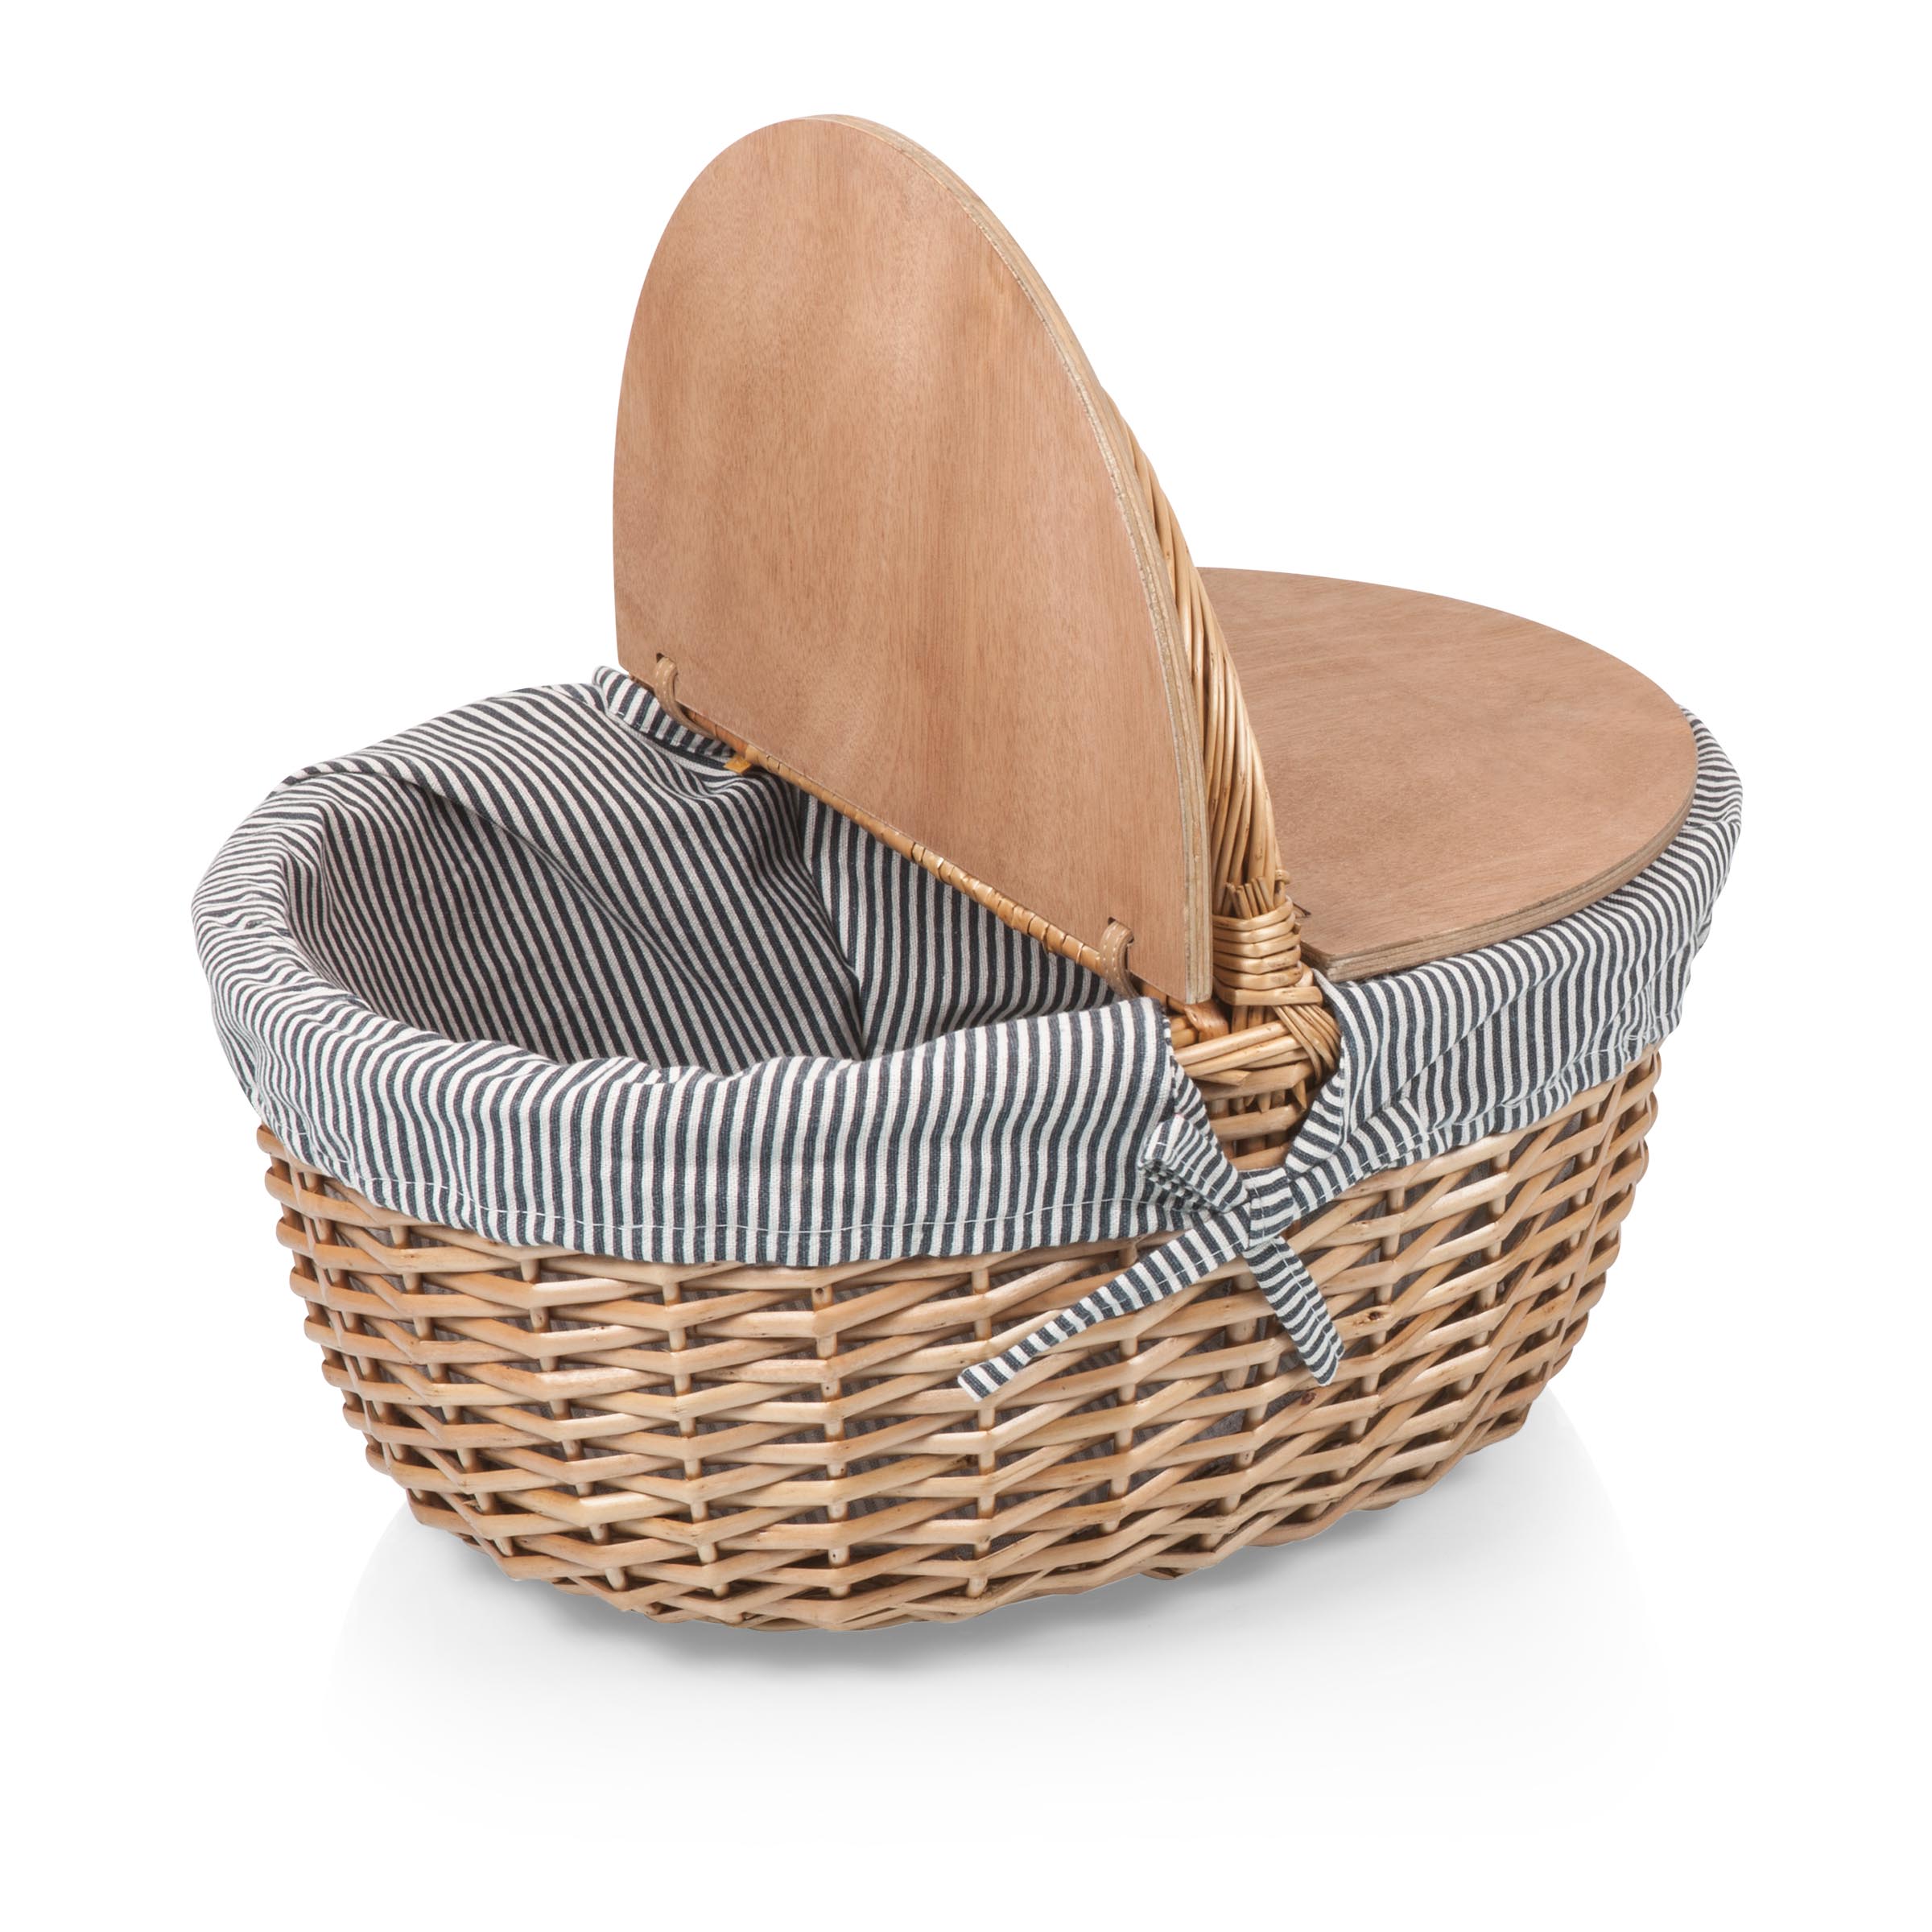 PICNIC TIME Country Picnic Basket - image 4 of 4